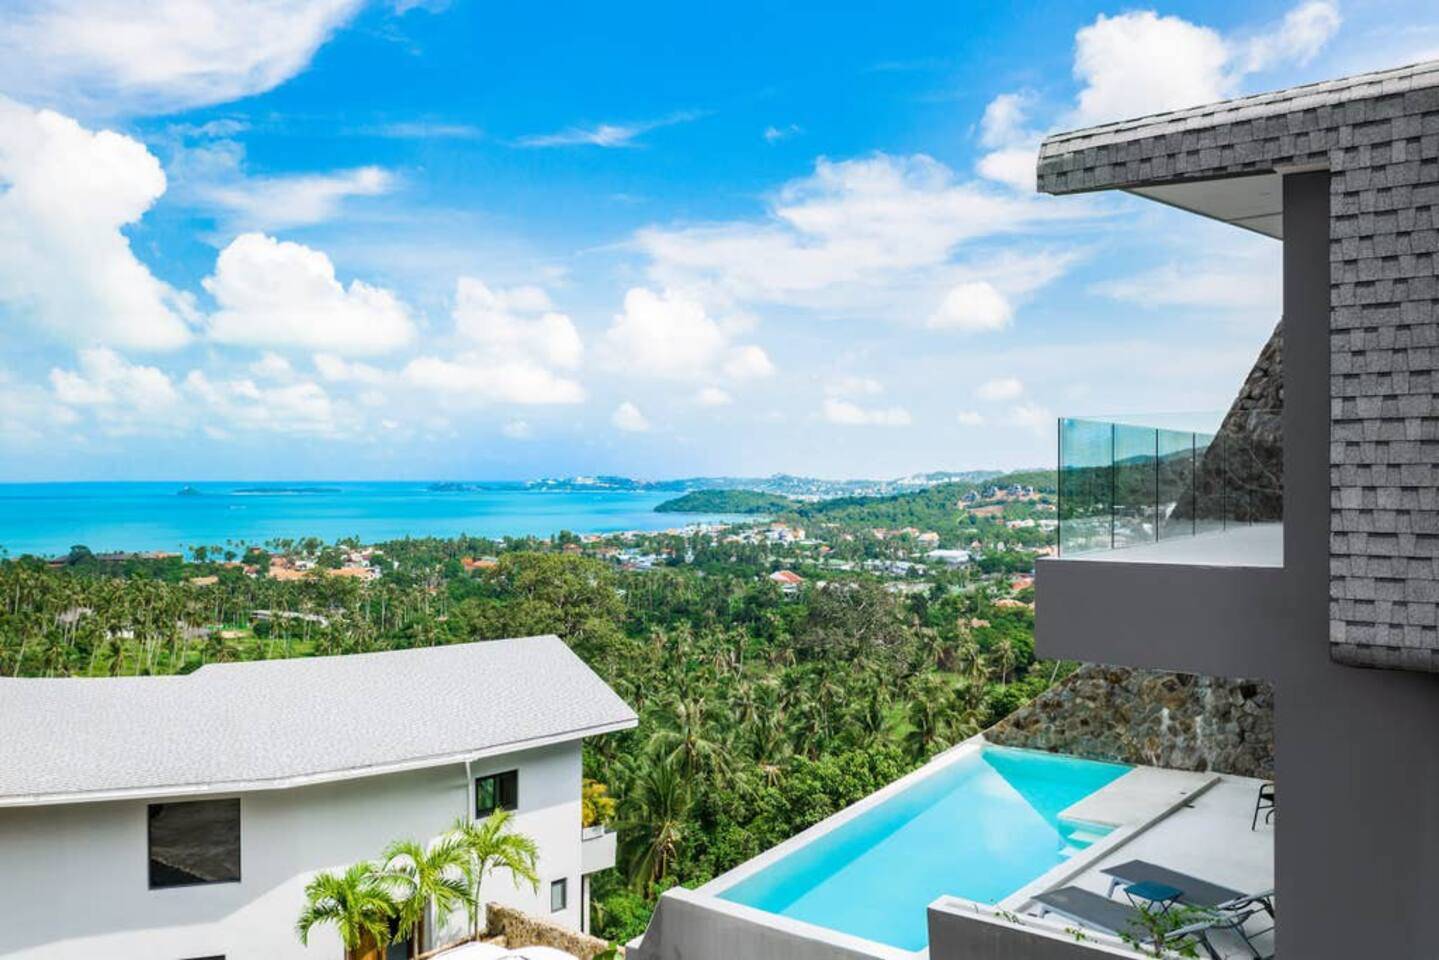 2 bedrooms private pool apartment for sale in Bophut Hills, Koh Samui. : 2 bedrooms private pool apartment for sale in Bophut Hills, Koh Samui. 